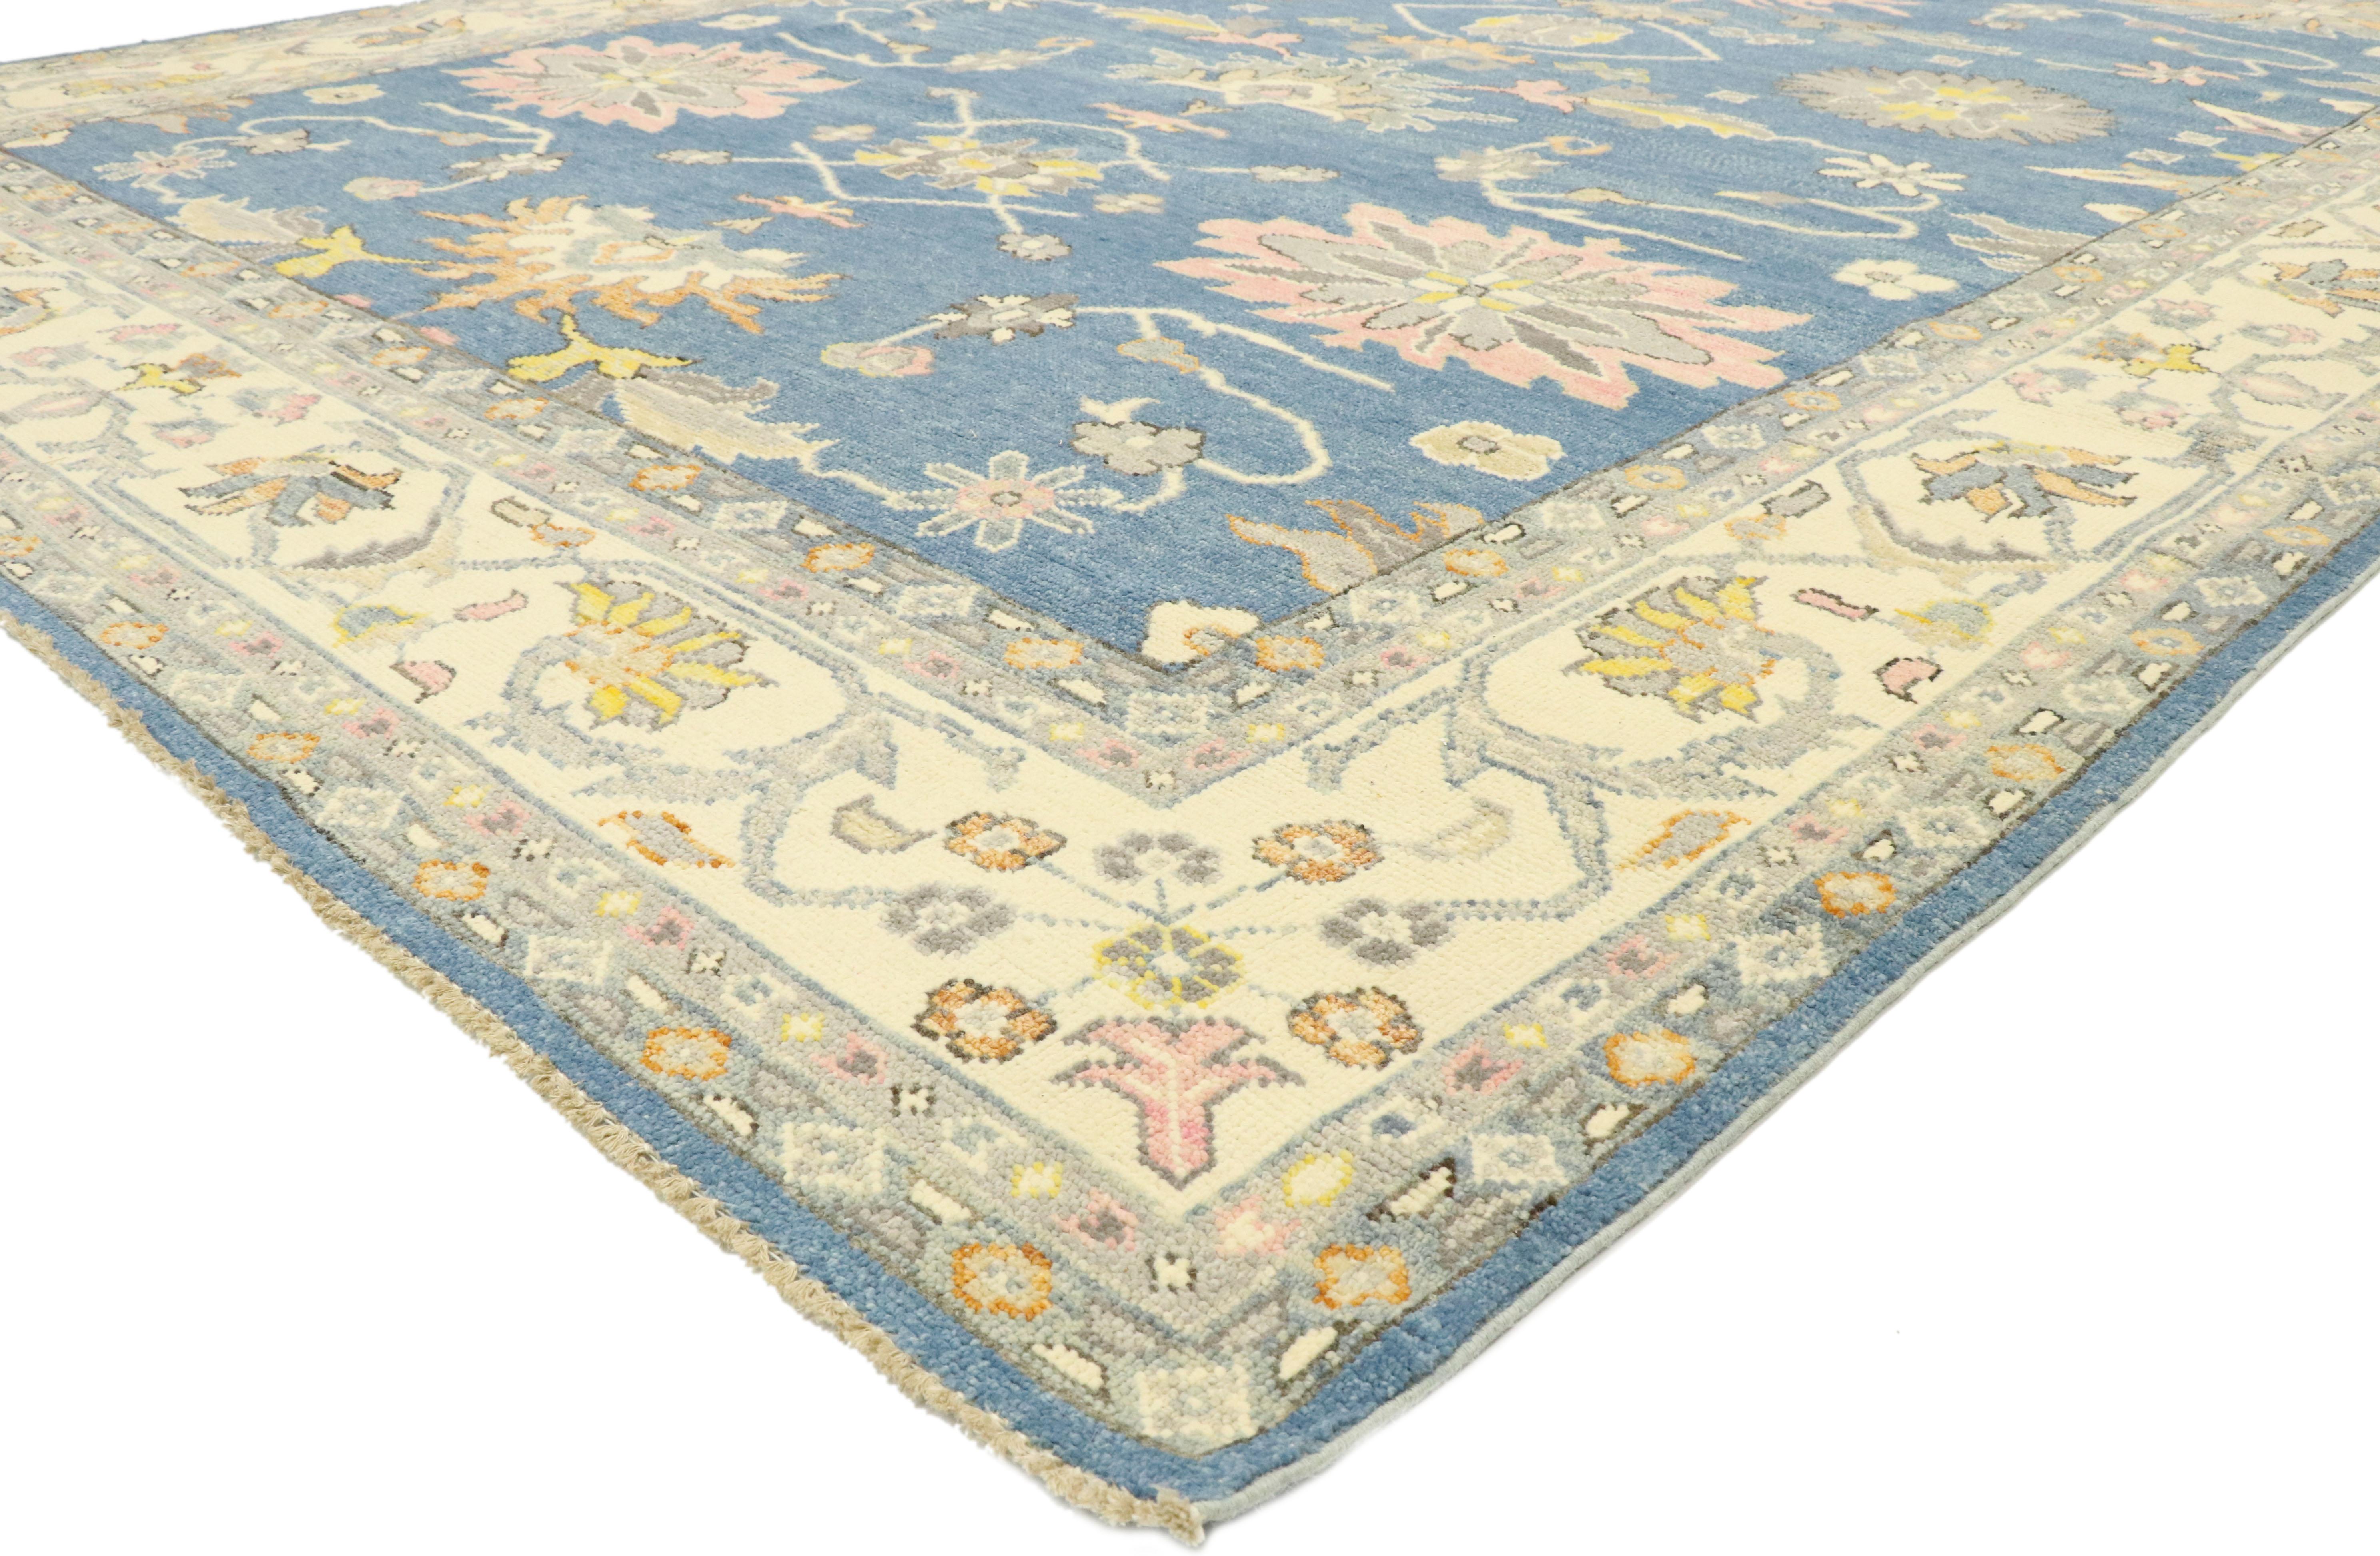 80599, new contemporary colorful blue Oushak rug with modern pastel style. Blending elements from the modern world with pastel colors, this hand knotted wool contemporary Oushak style area rug will boost the coziness factor in nearly any space. The